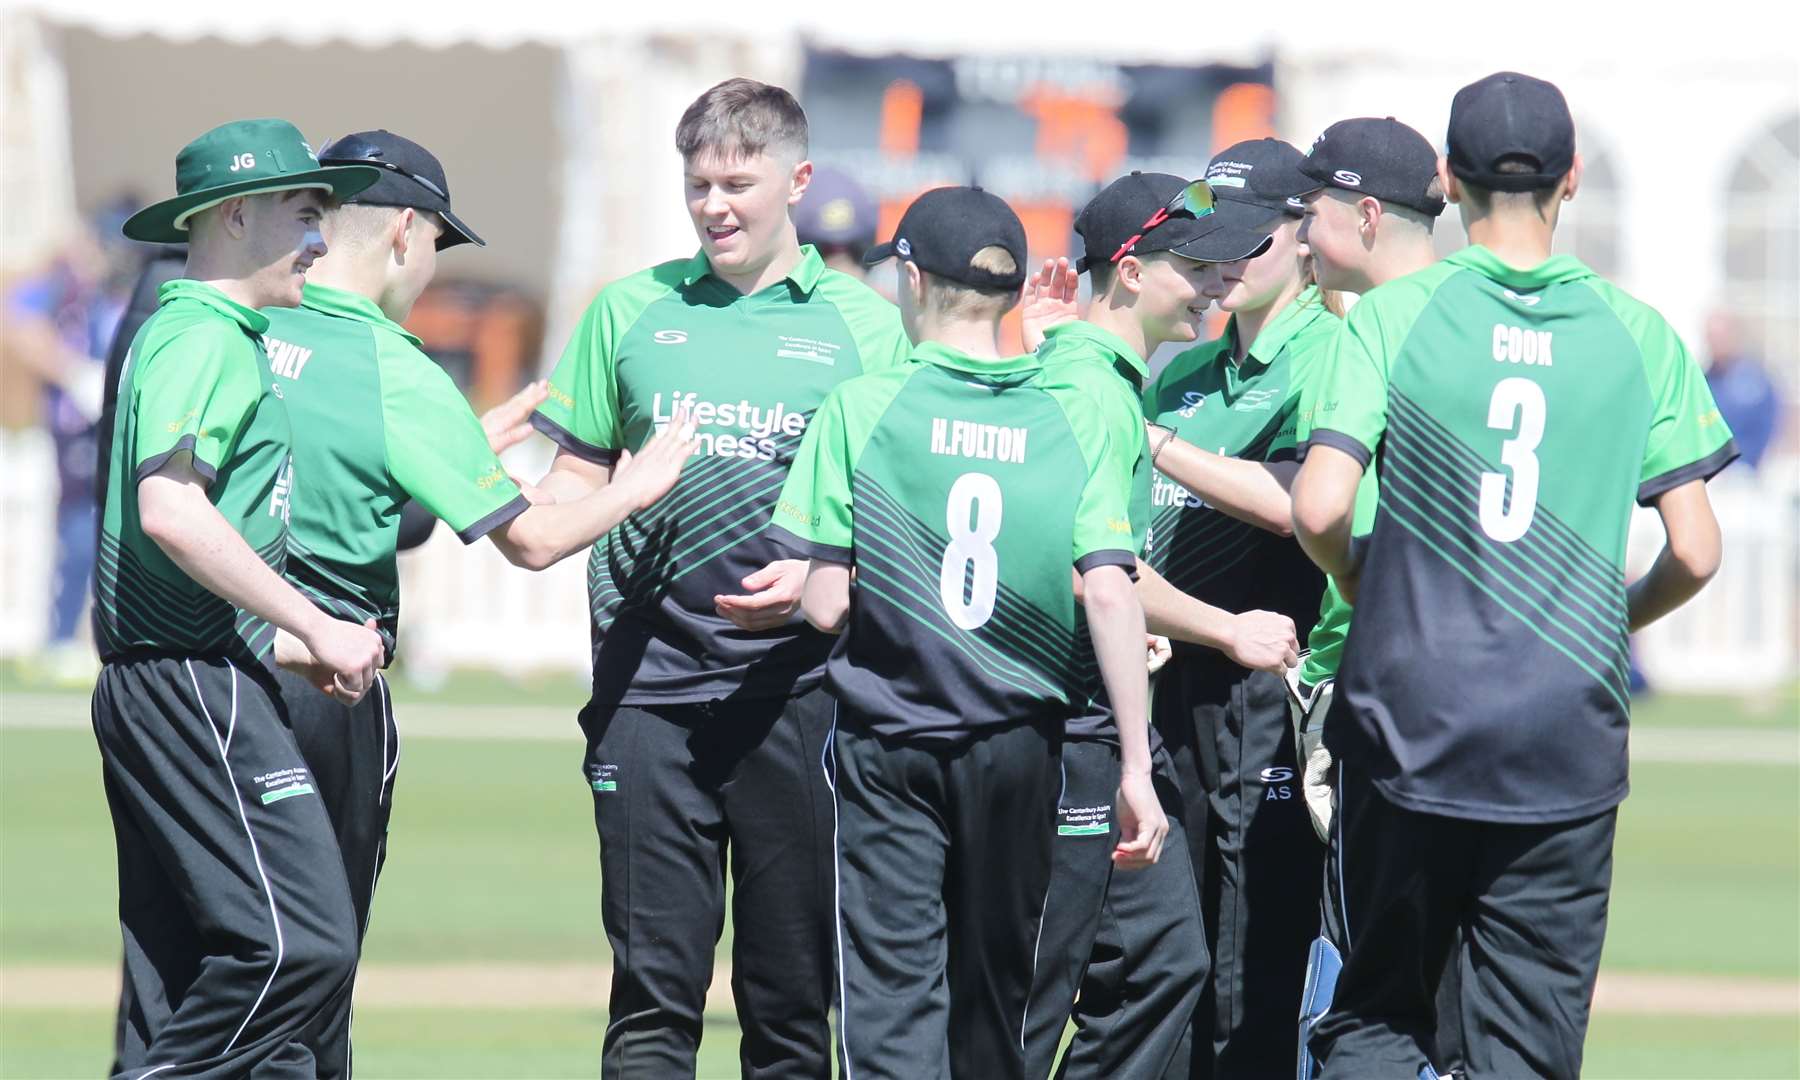 The Canterbury Academy celebrate taking a wicket during their successful trip to Desert Springs